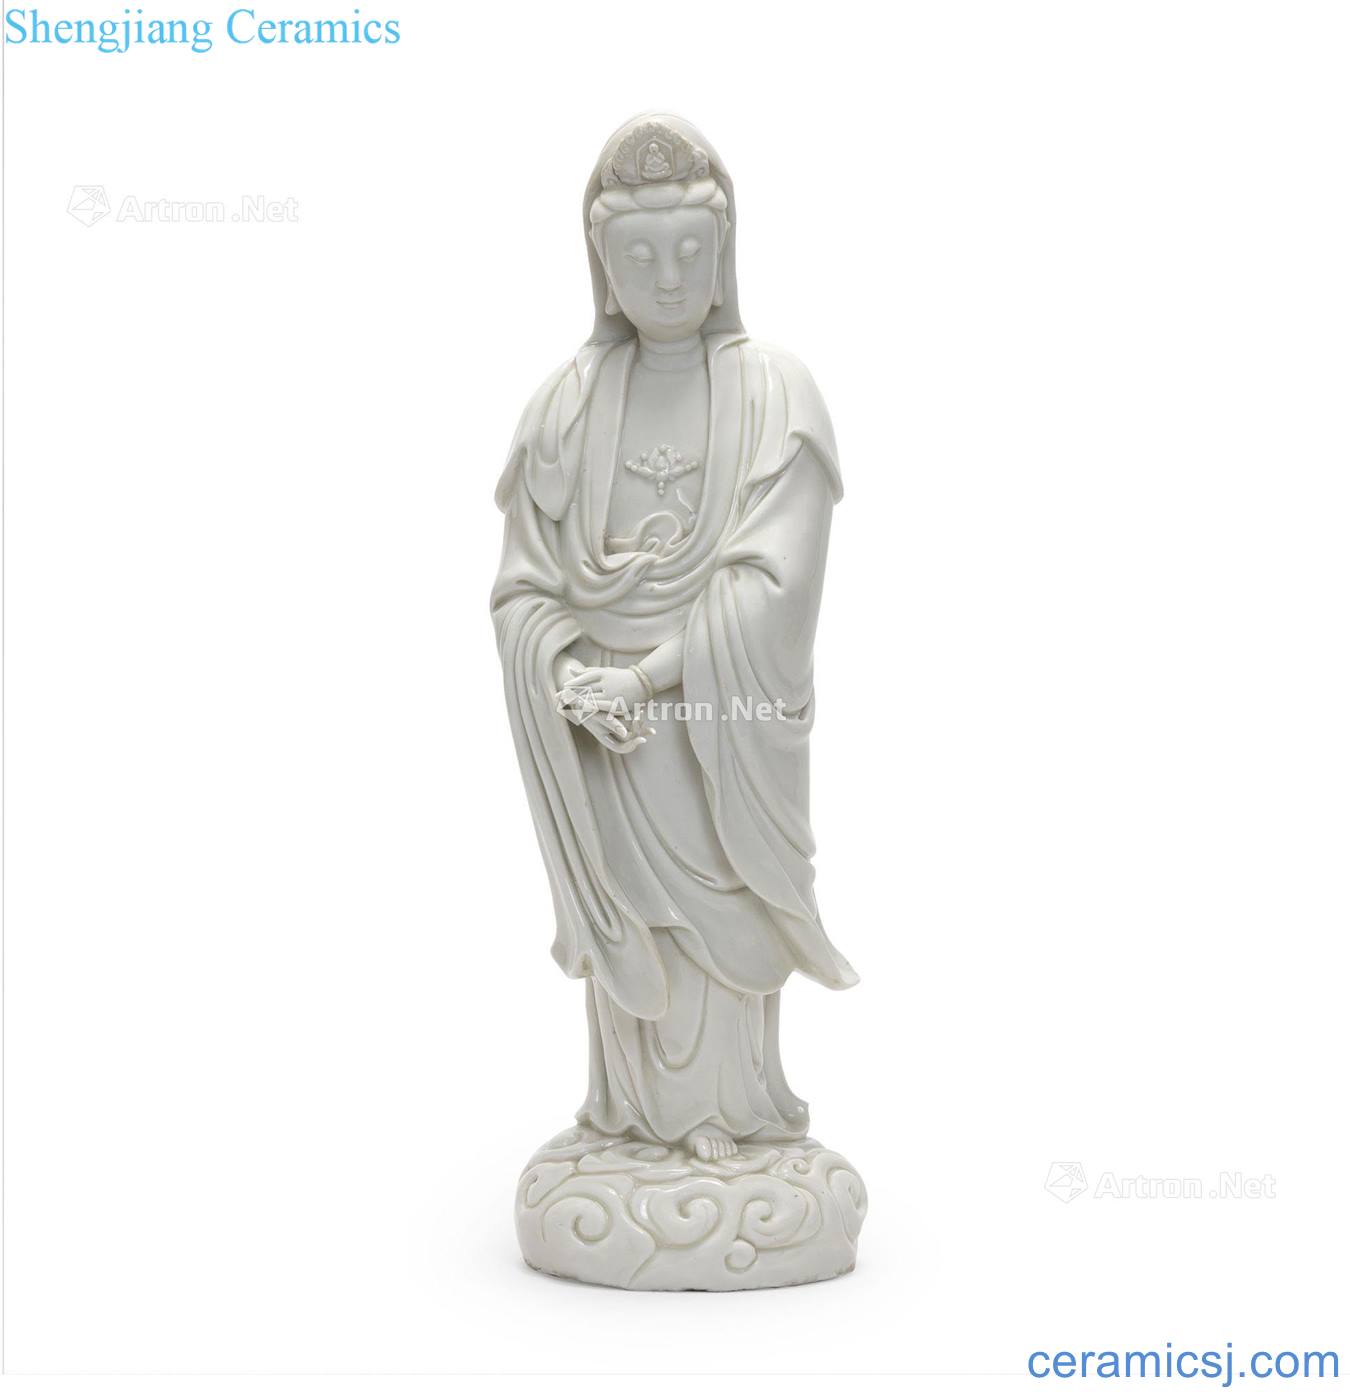 In the 17th century Dehua white porcelain guanyin stands resemble